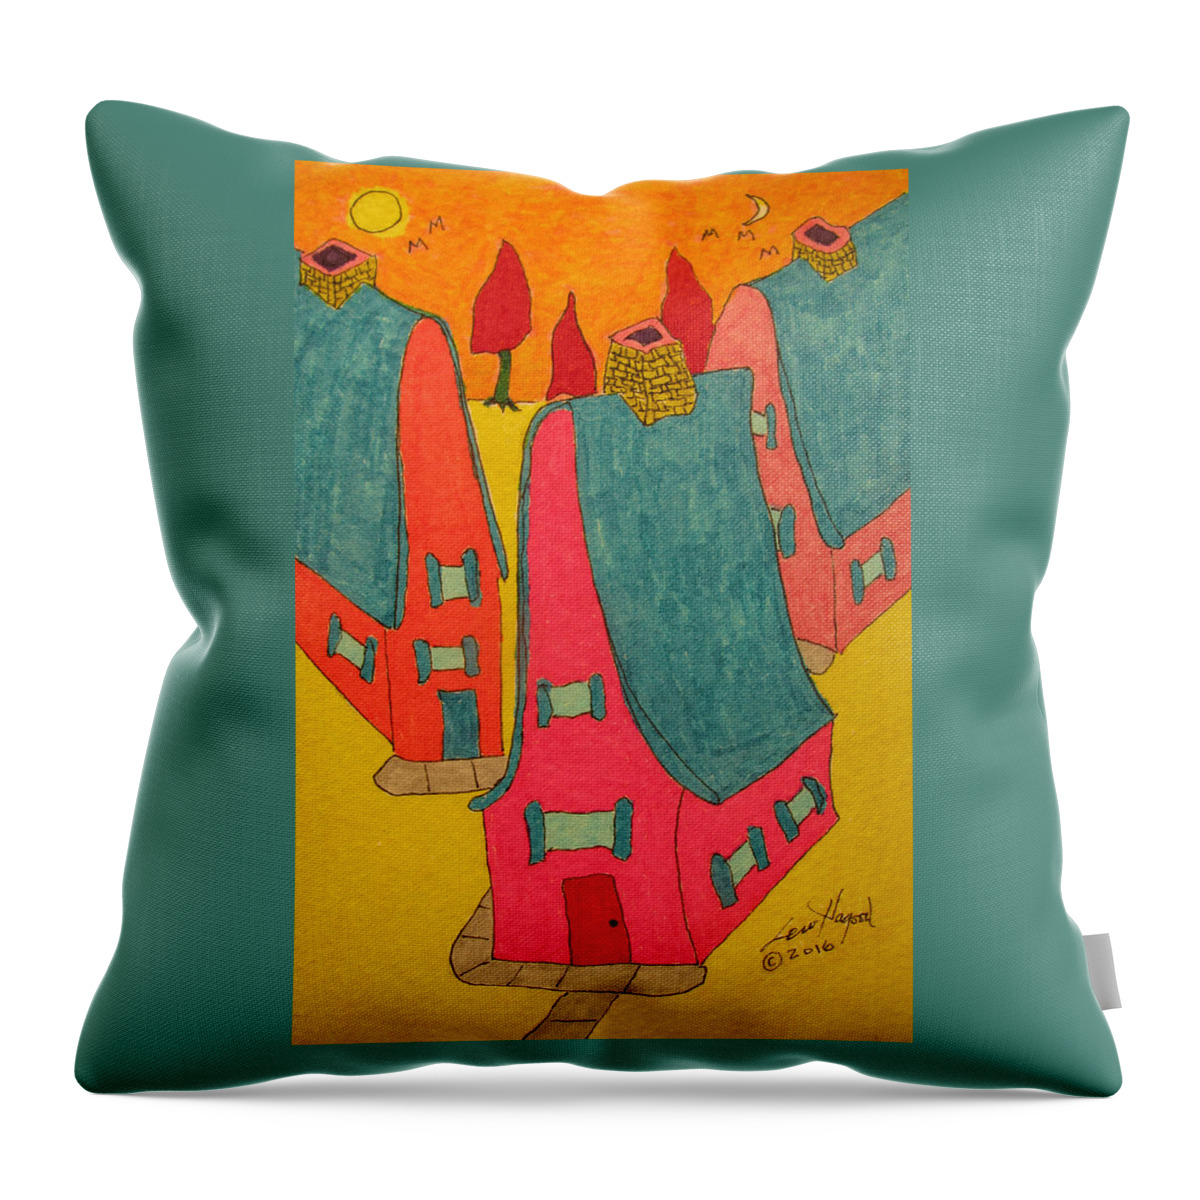 Hagood Throw Pillow featuring the painting 3 Homes With Three Red Trees by Lew Hagood